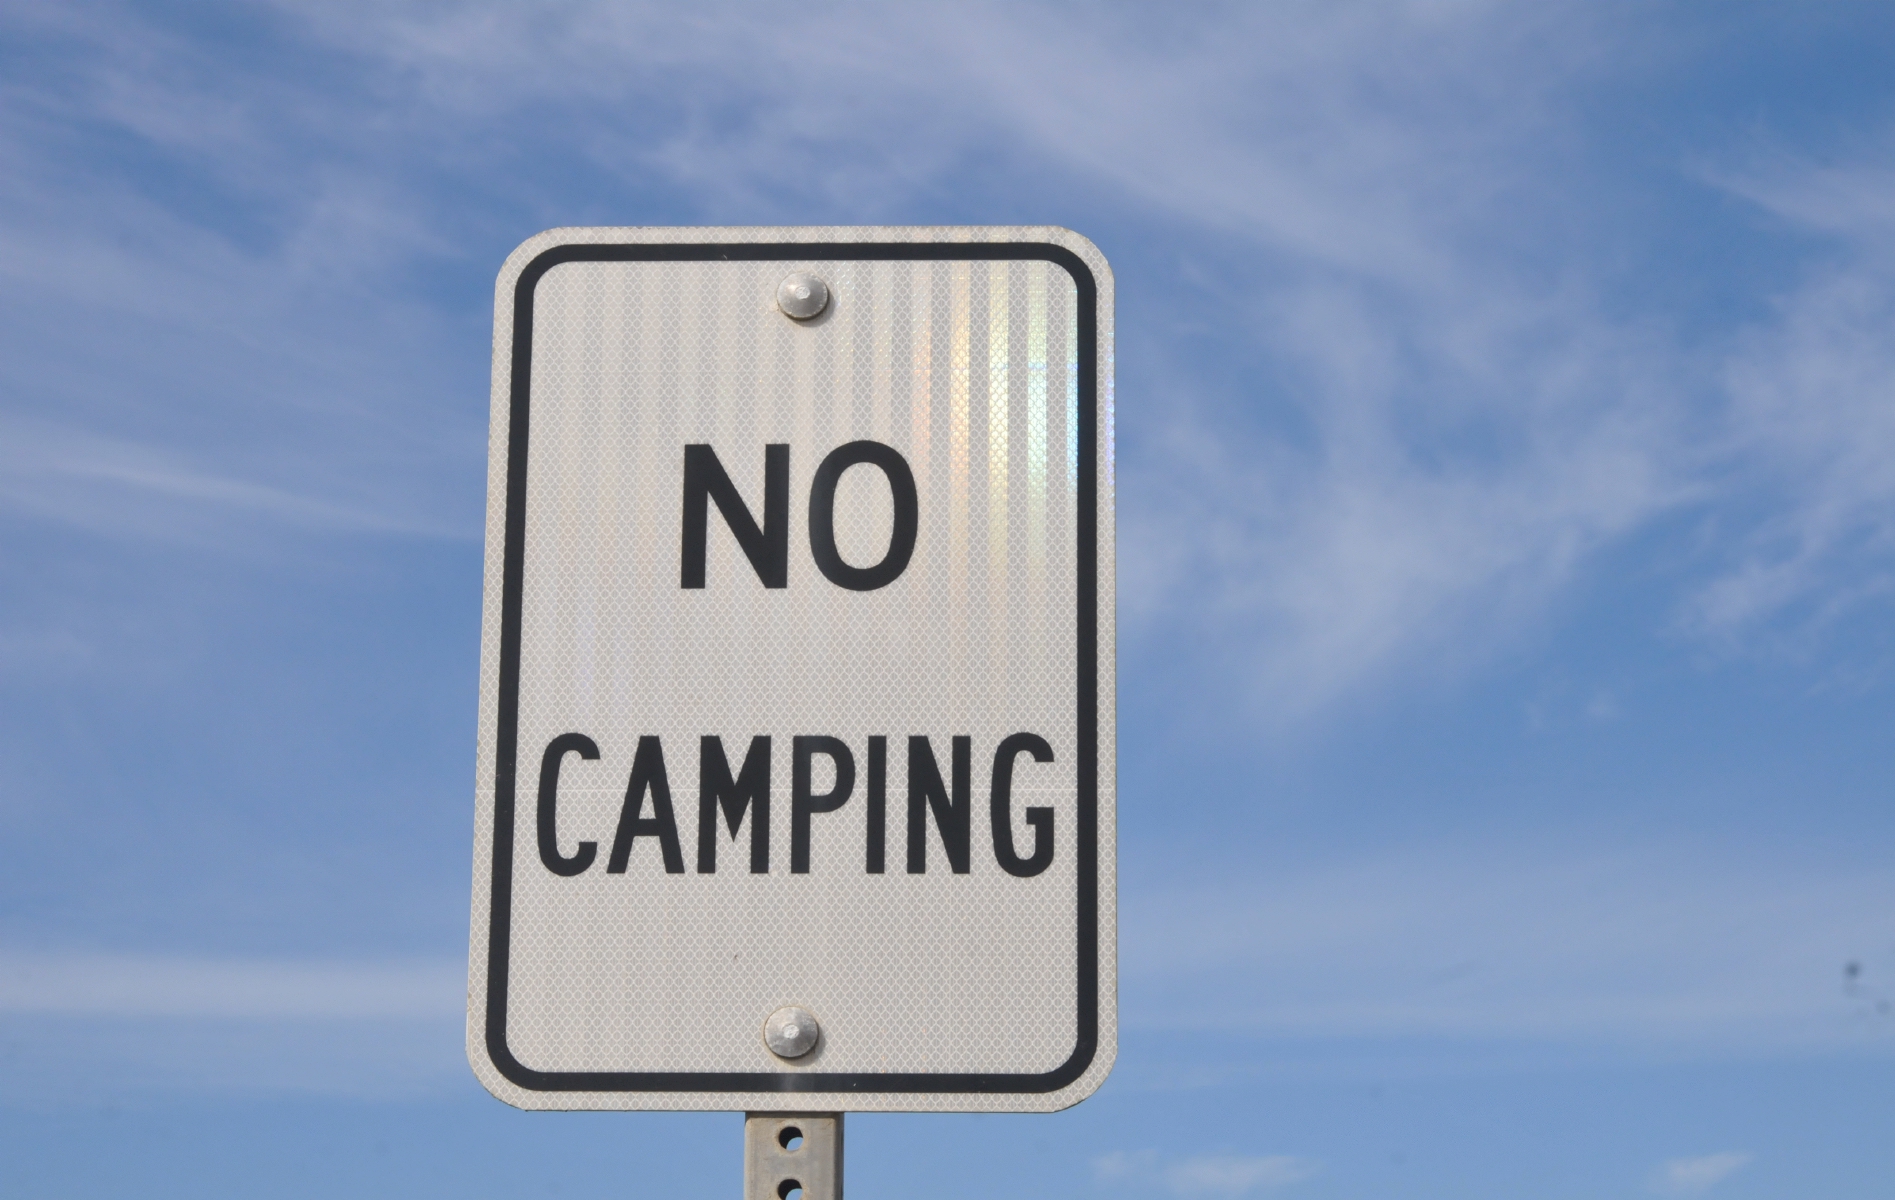 Beaches Are Closed For Camping Over Easter Holiday, But Churches Are Open